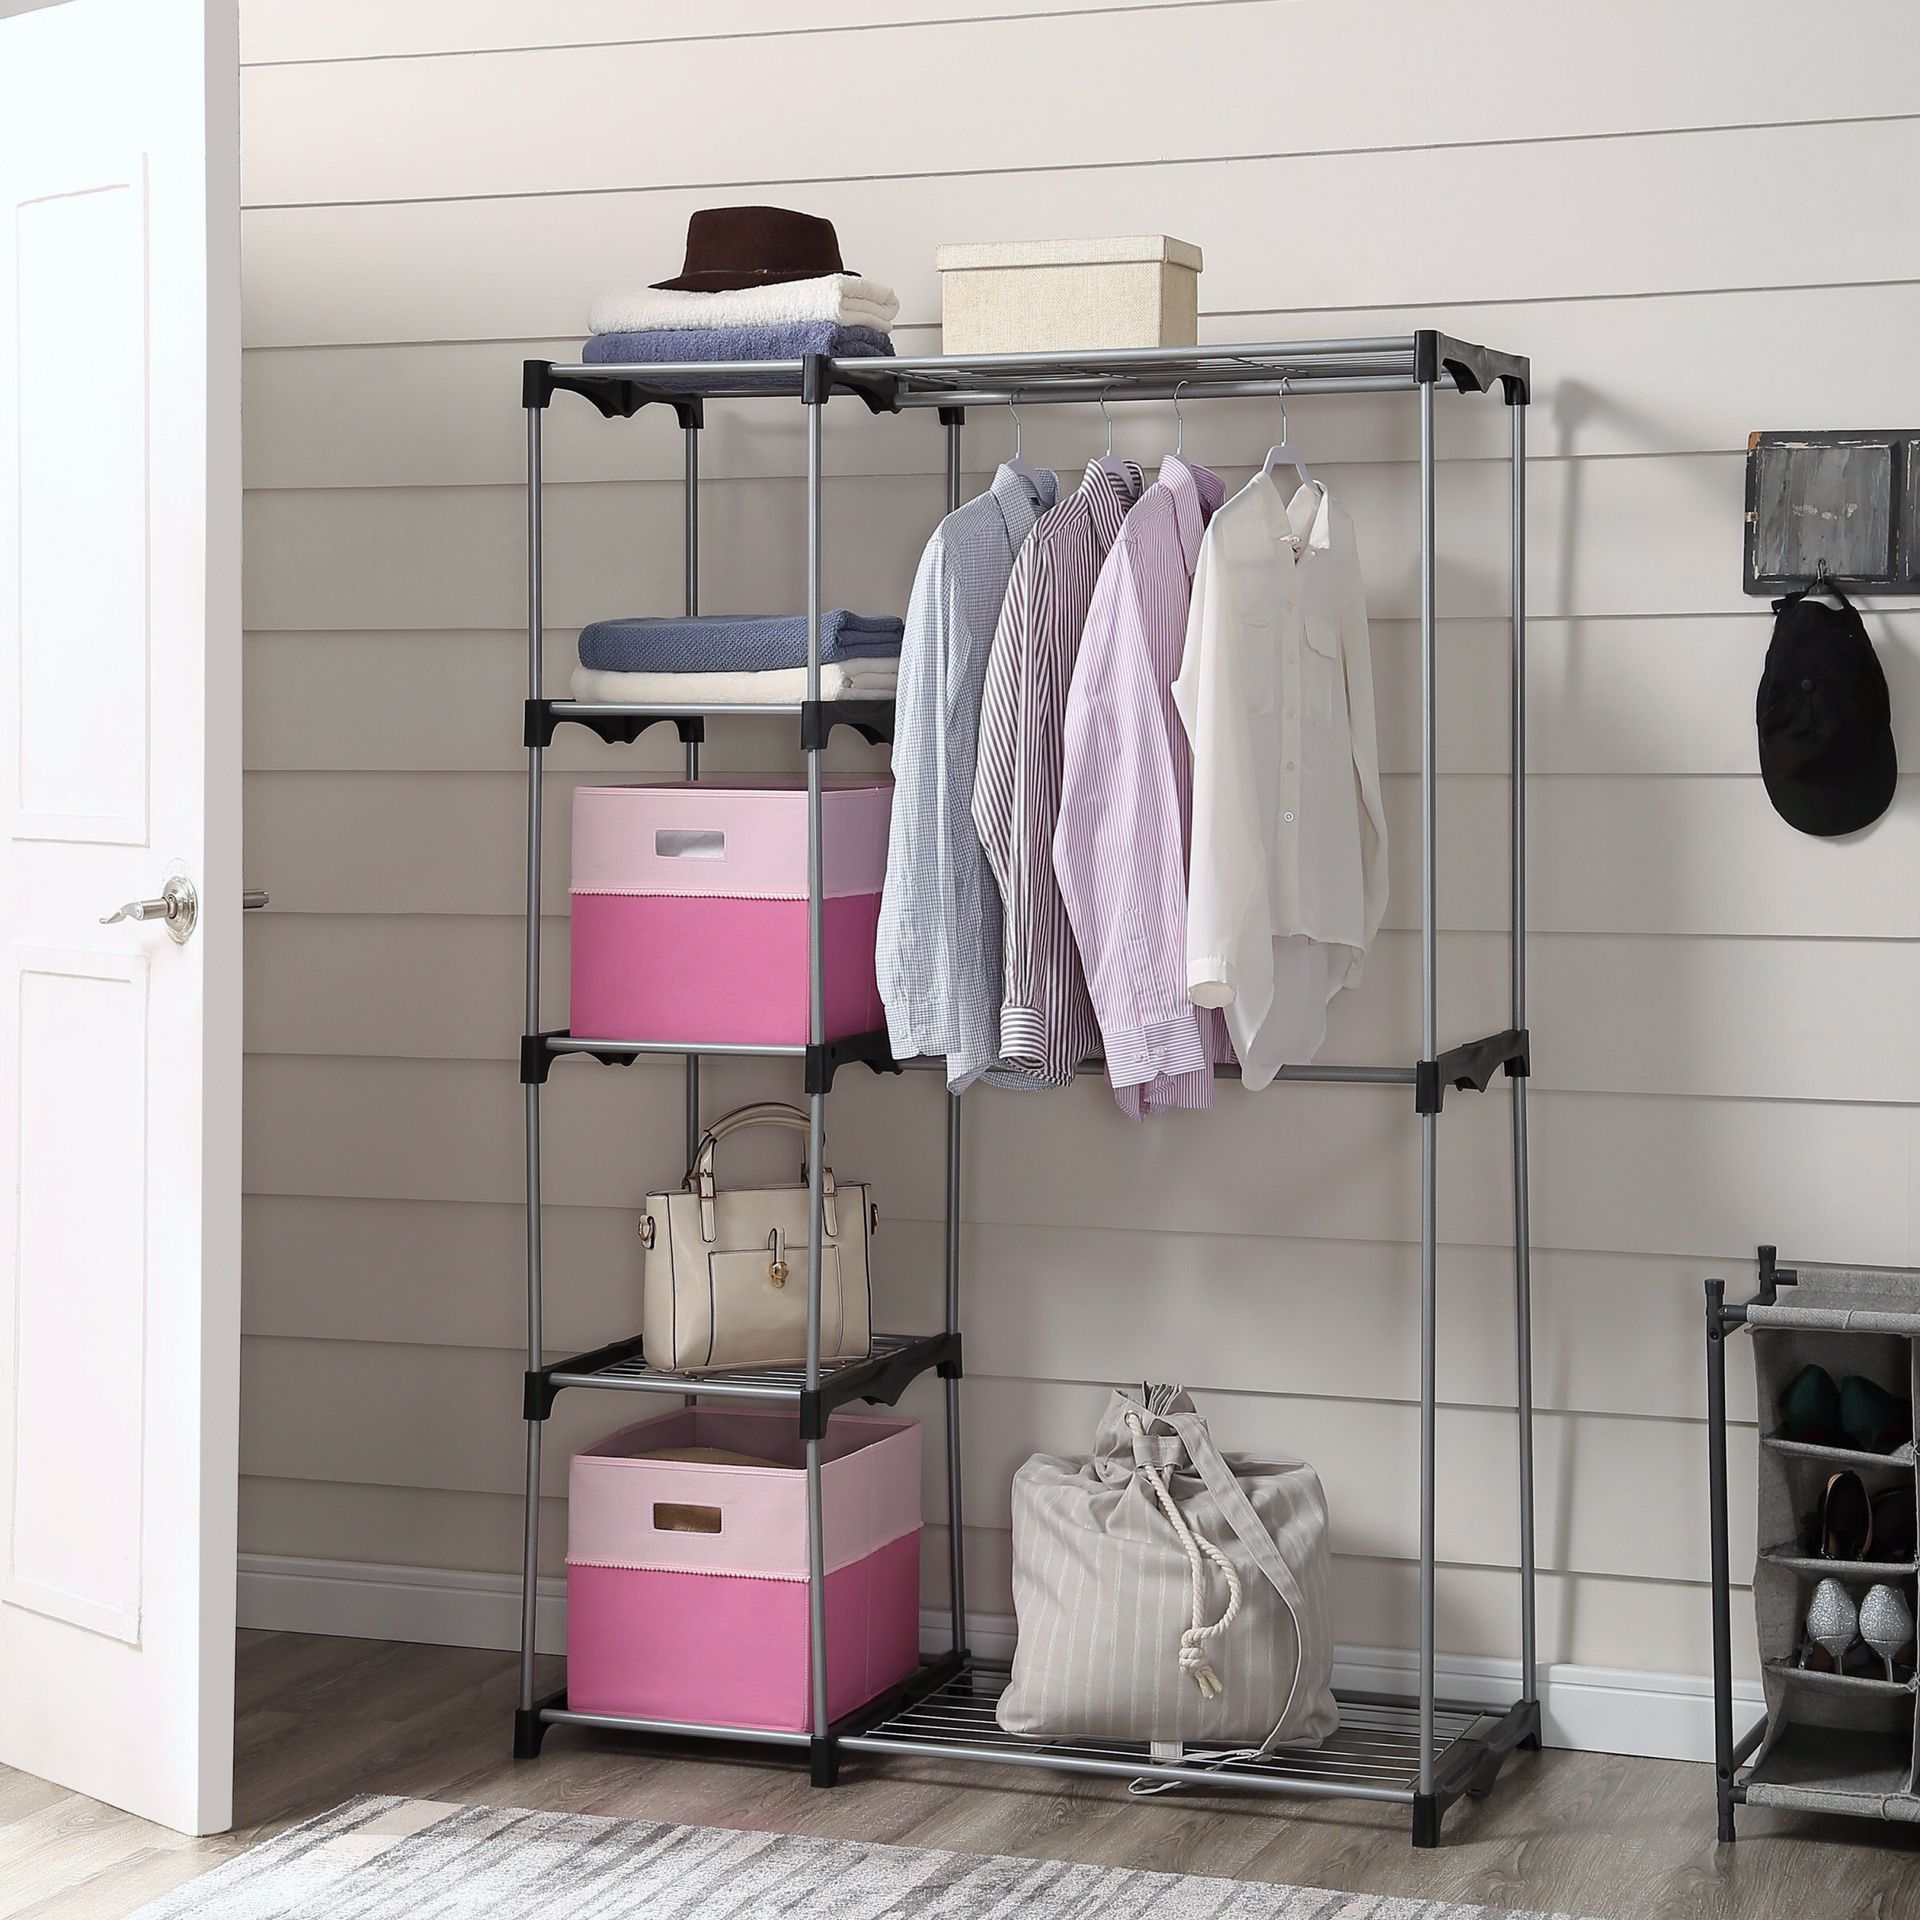 Mainstays Closet Organizer -2 Hanging Racks and 4 adjustable shelves / Easy to Assemble